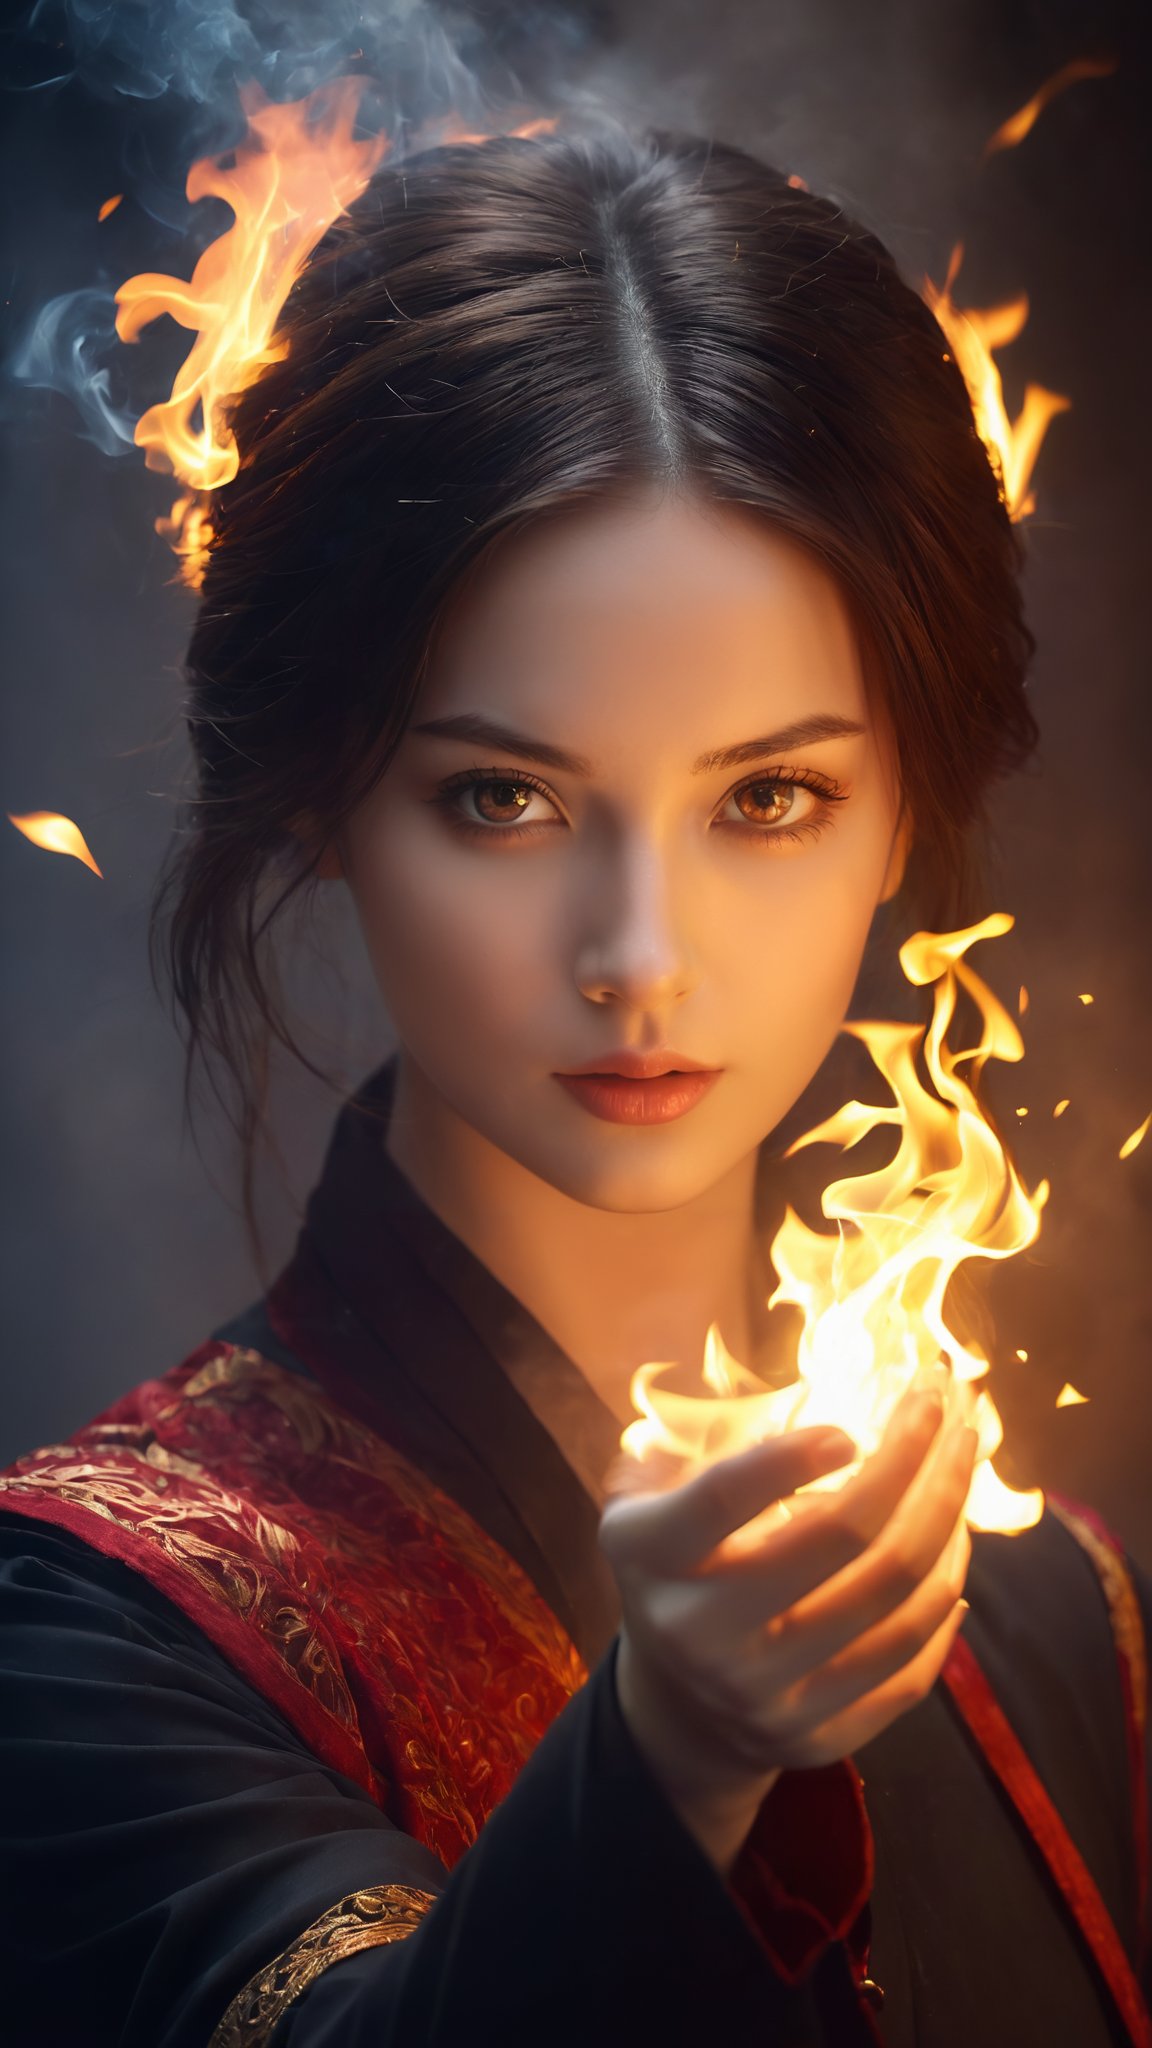 1 Girl, Raging Fire, Fire Magic, Fire Control, Magicism, Shocking Images, Fantasy, Magician